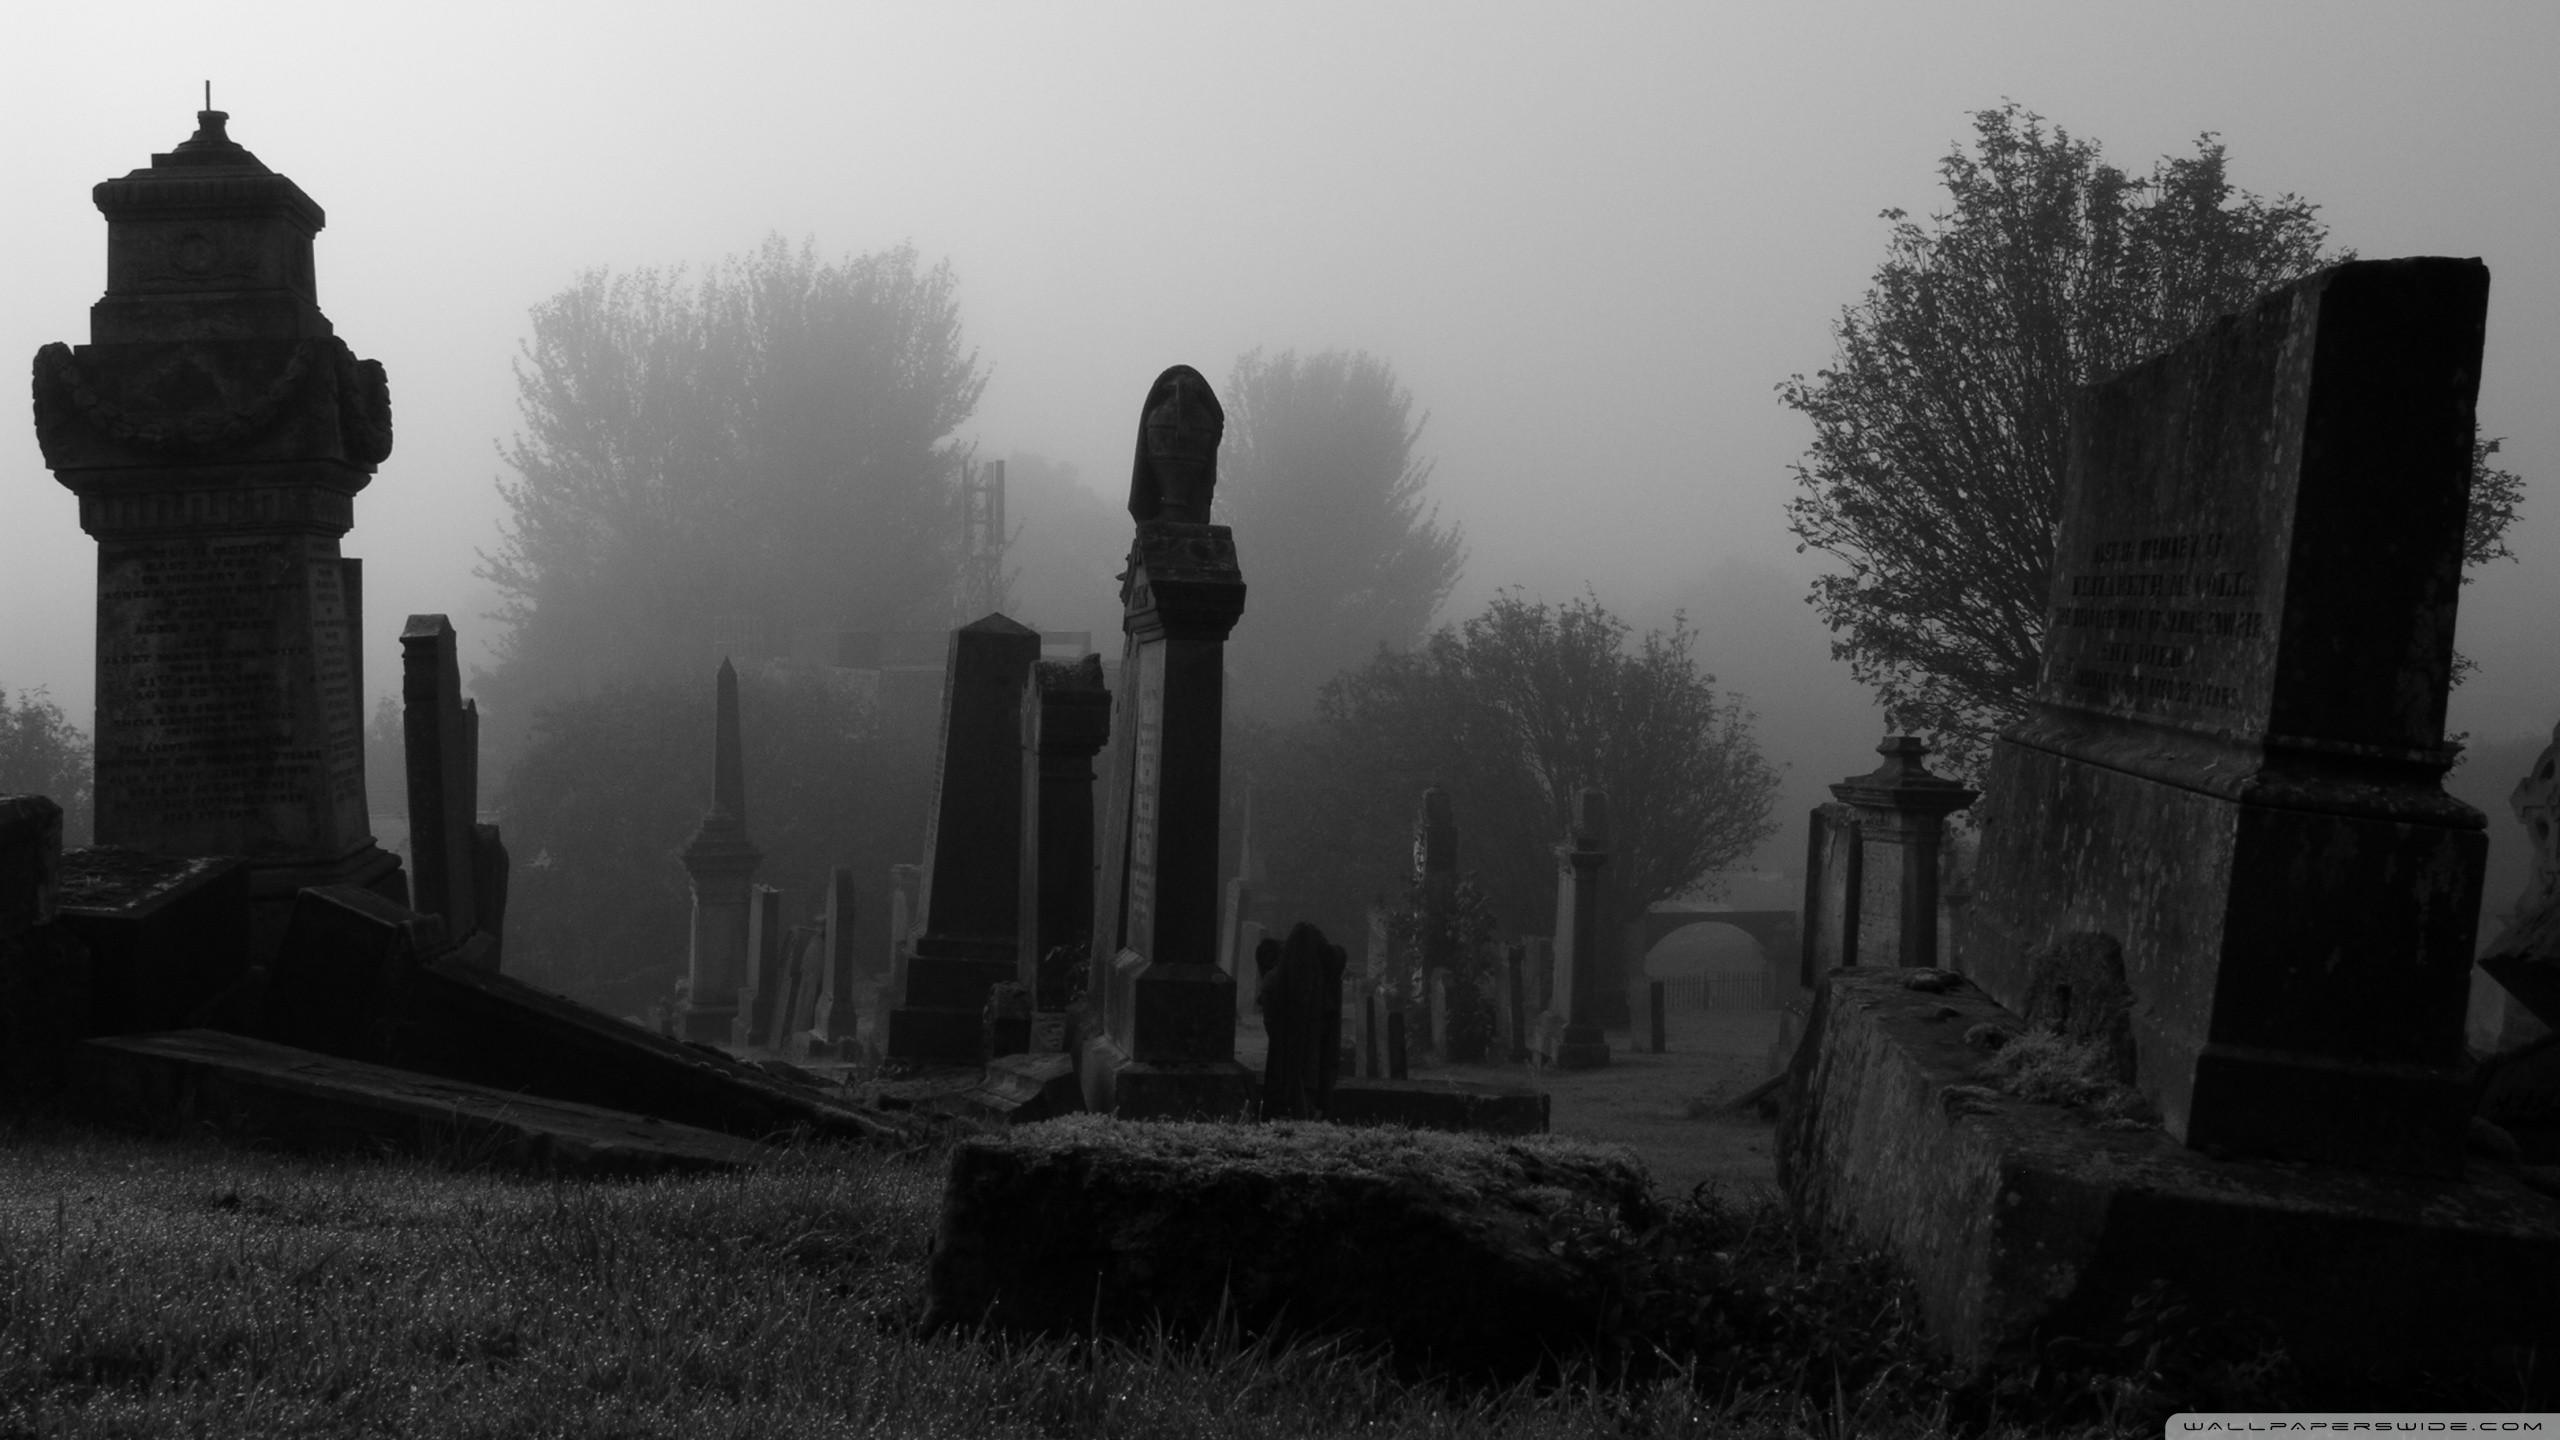 2560x1440 ... THE CEMETERY WALLPAPER - (#80406) - HD Wallpapers .